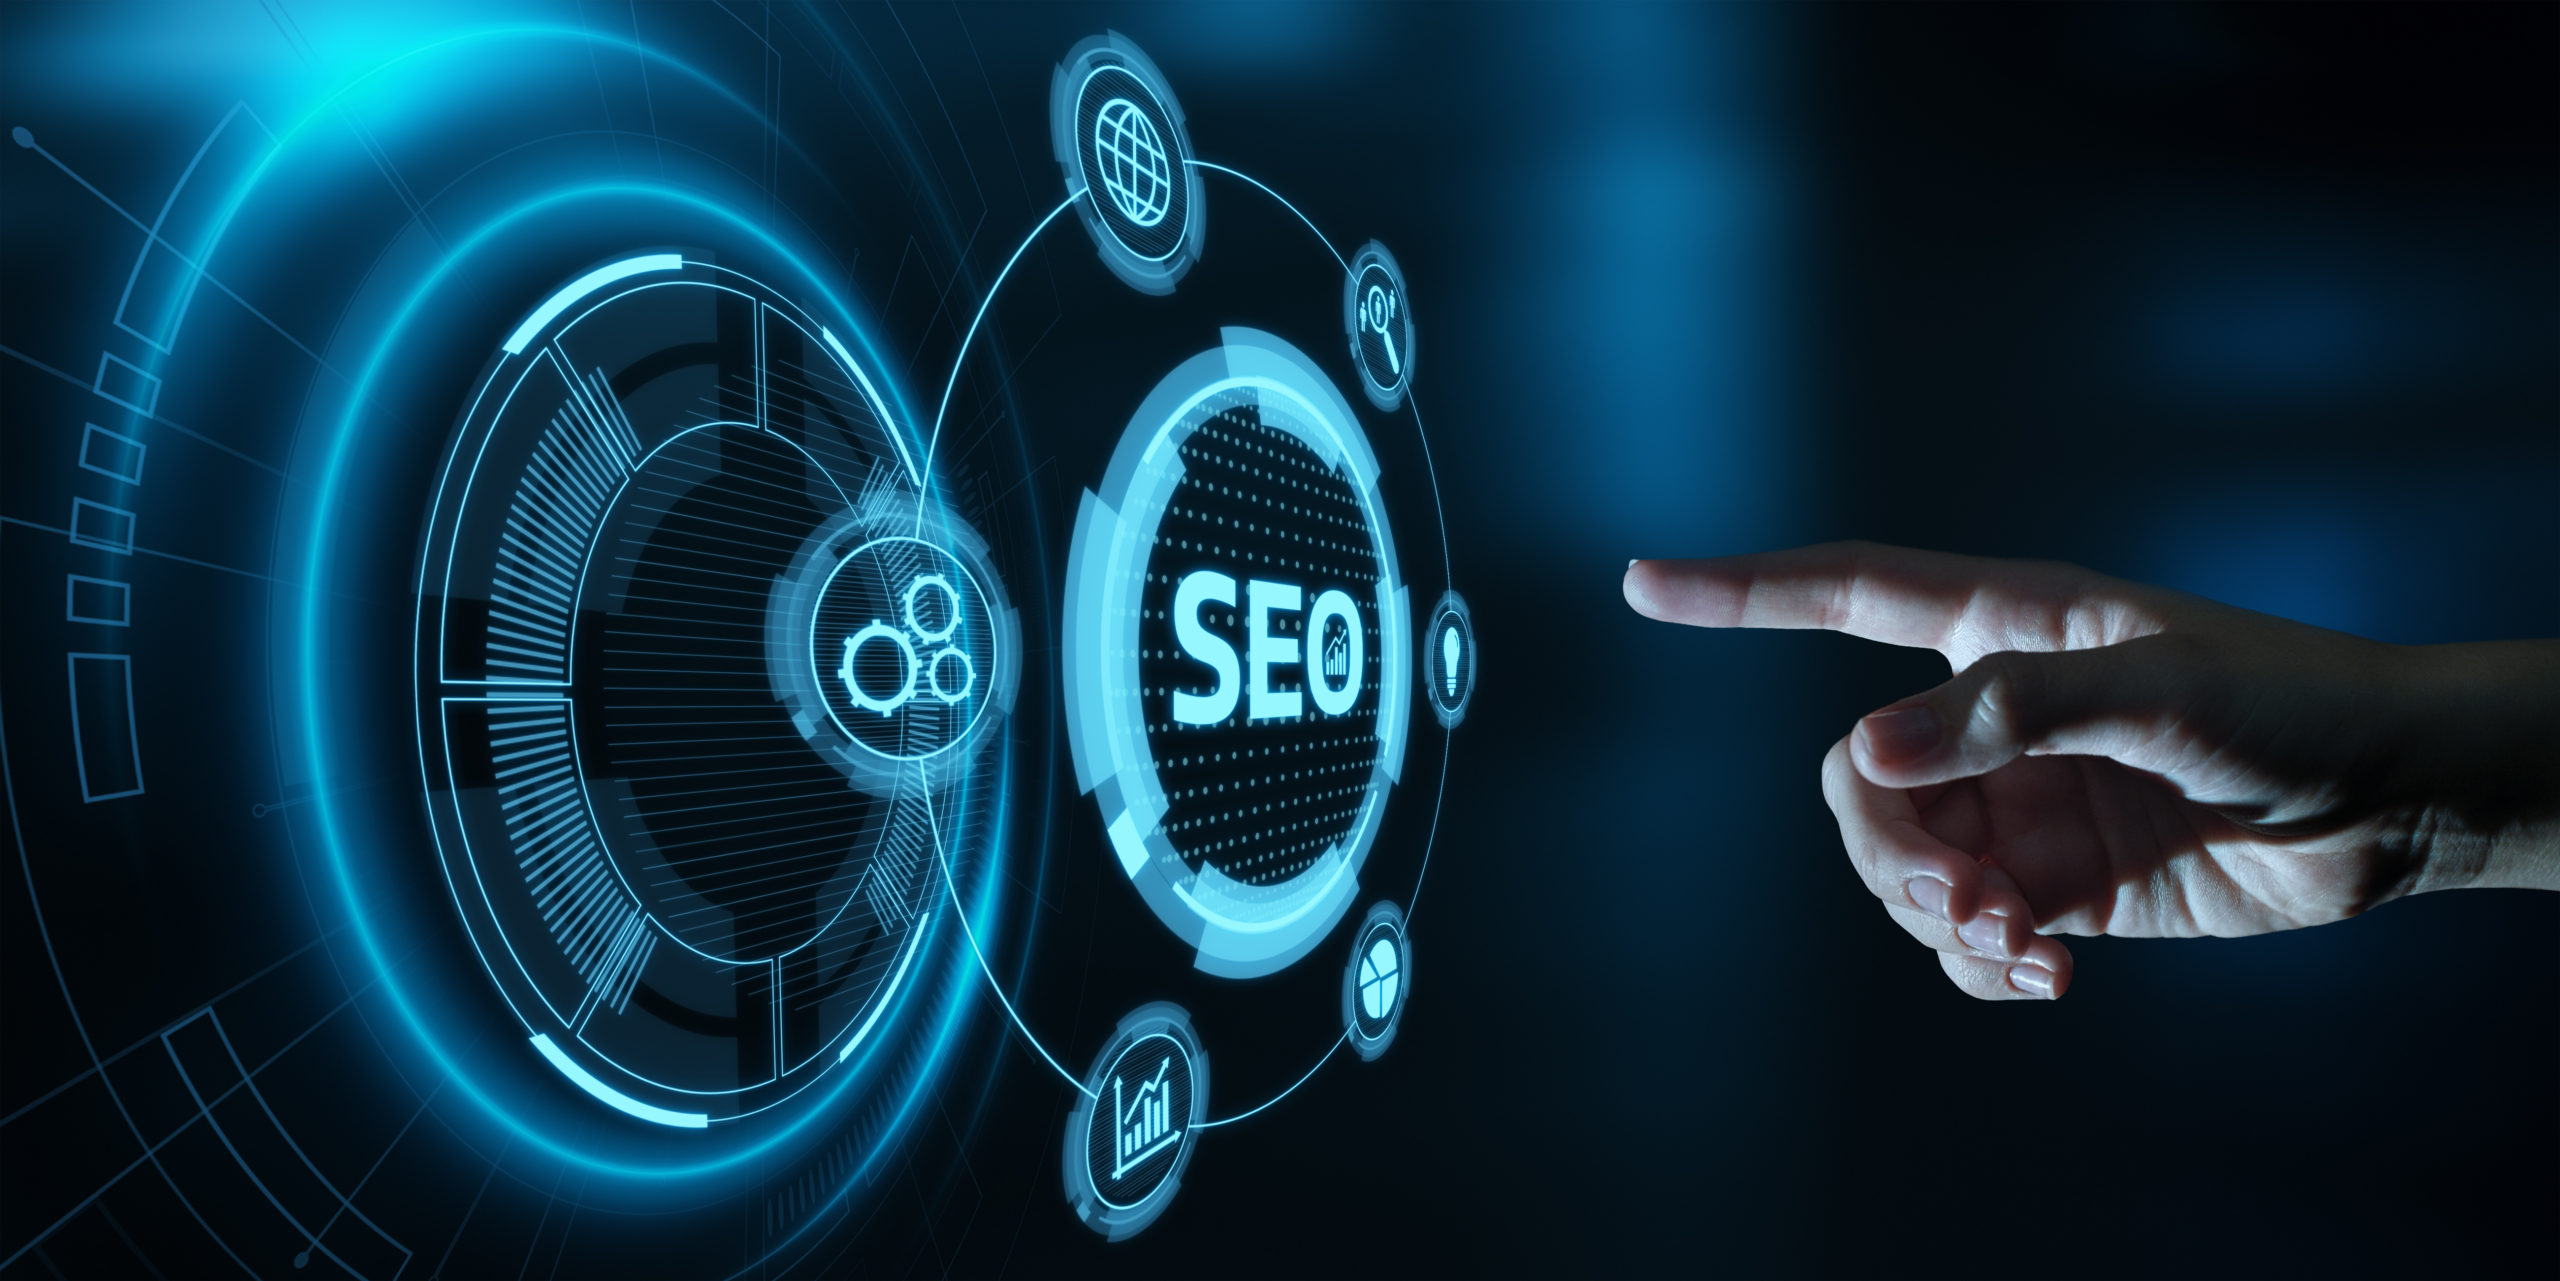 SEO and its importance